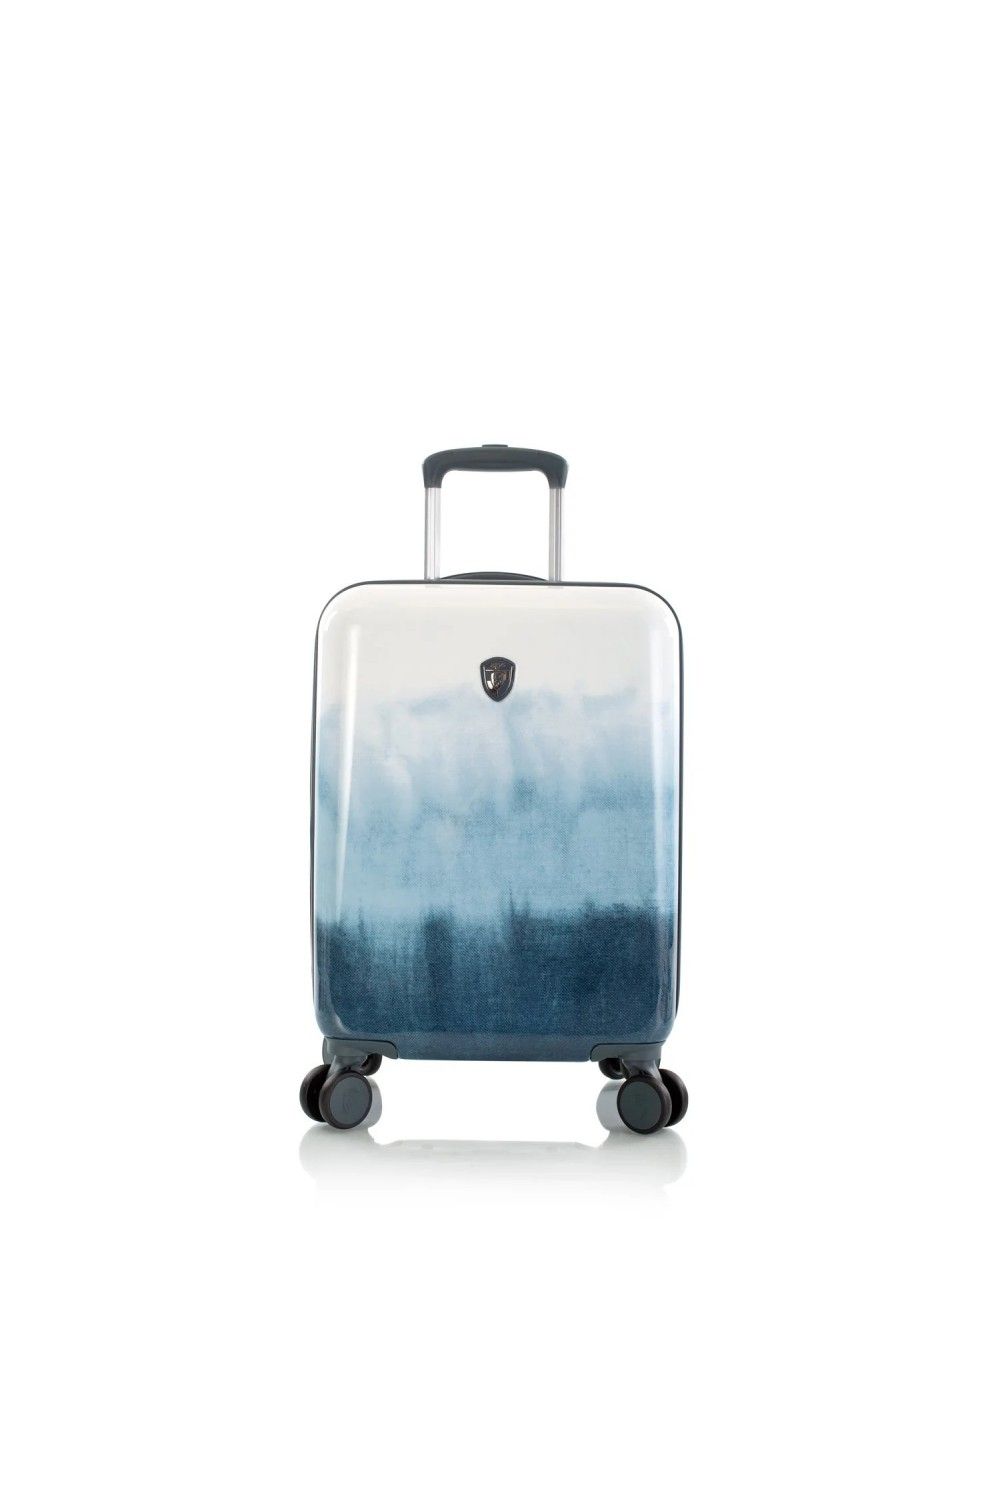 Valise bagage a main Heys BLUE Fashion 4 roues 55cm extensible